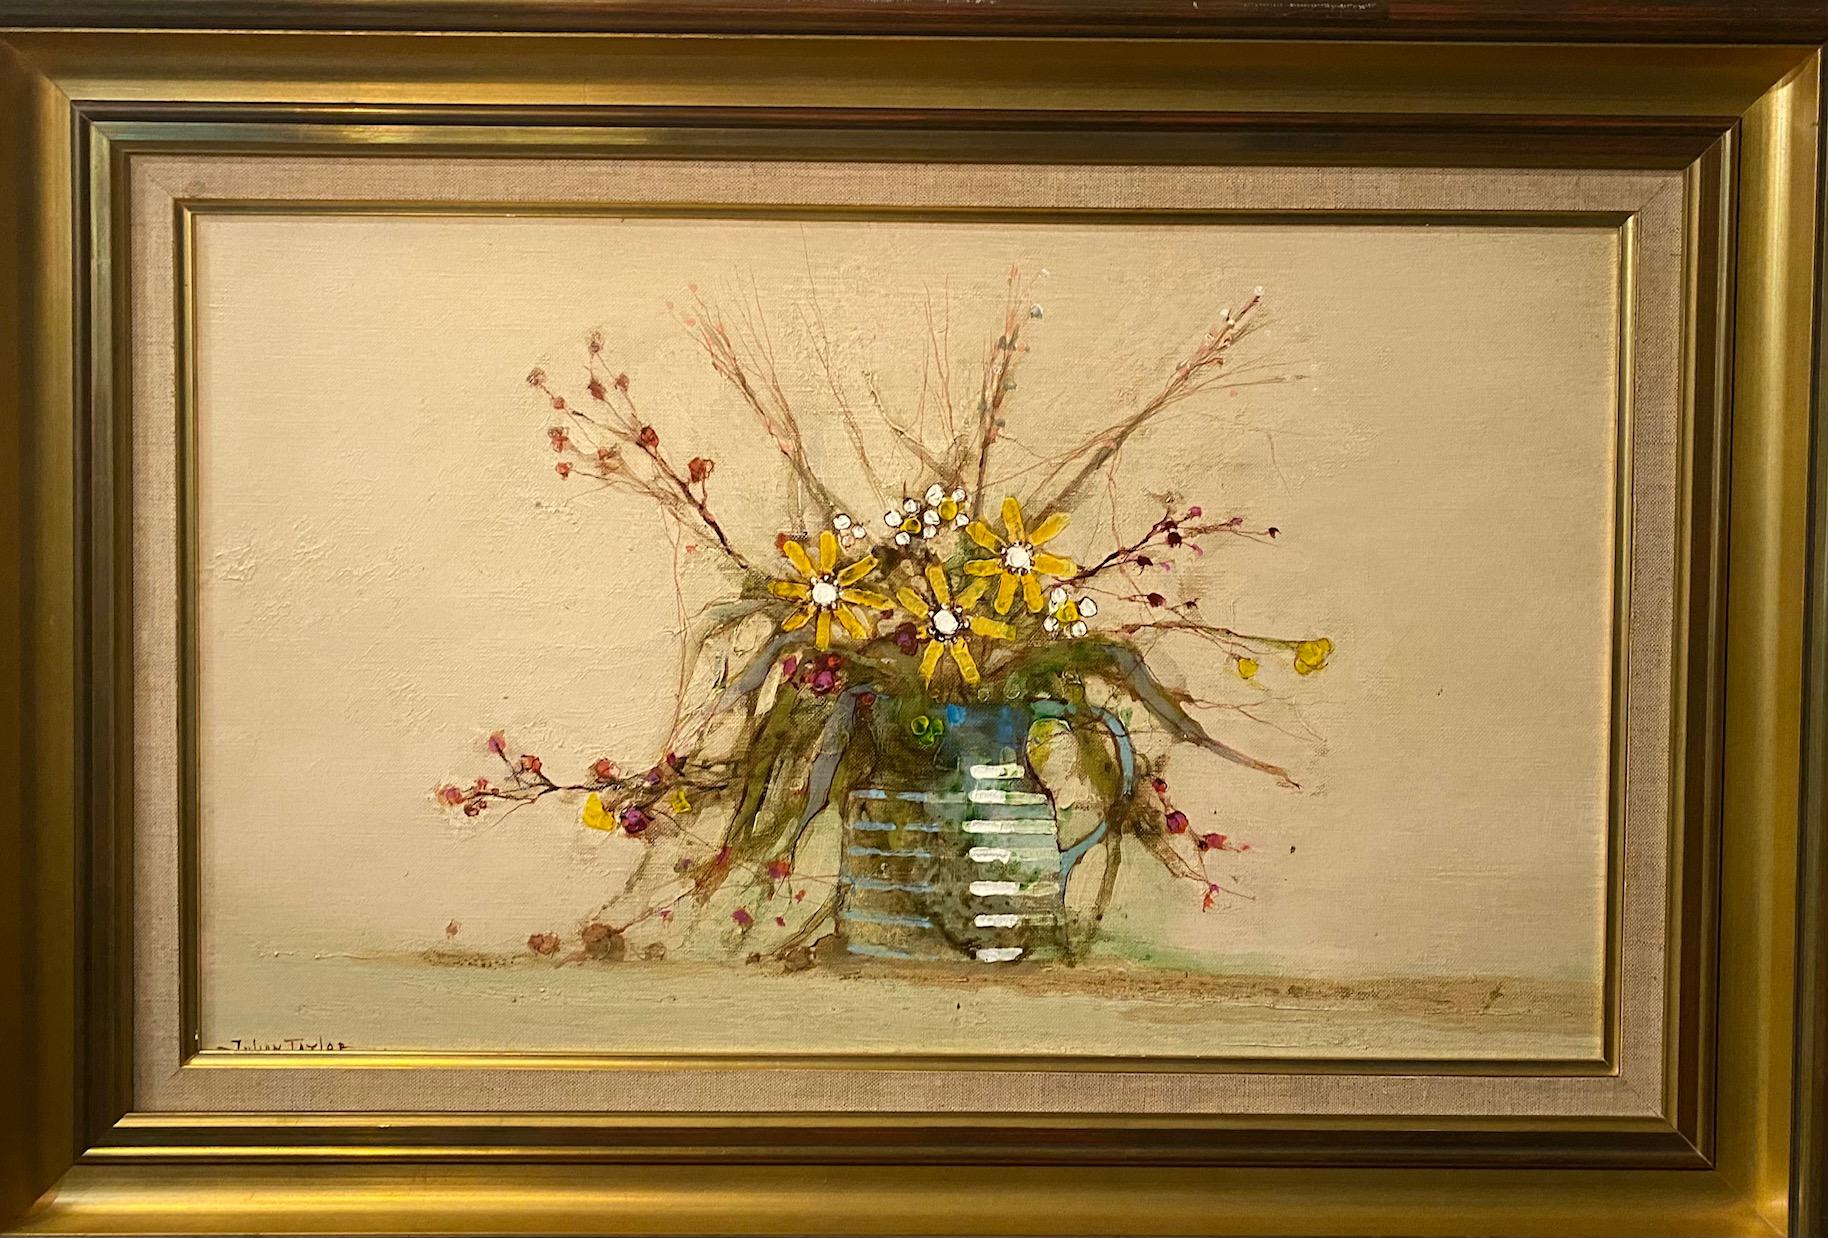 Oil on canvas sold with frame (golden leaf) 
Total size with frame is 47x69 cm
Johan Taylor is a Swiss artist born in the 20th century. 
